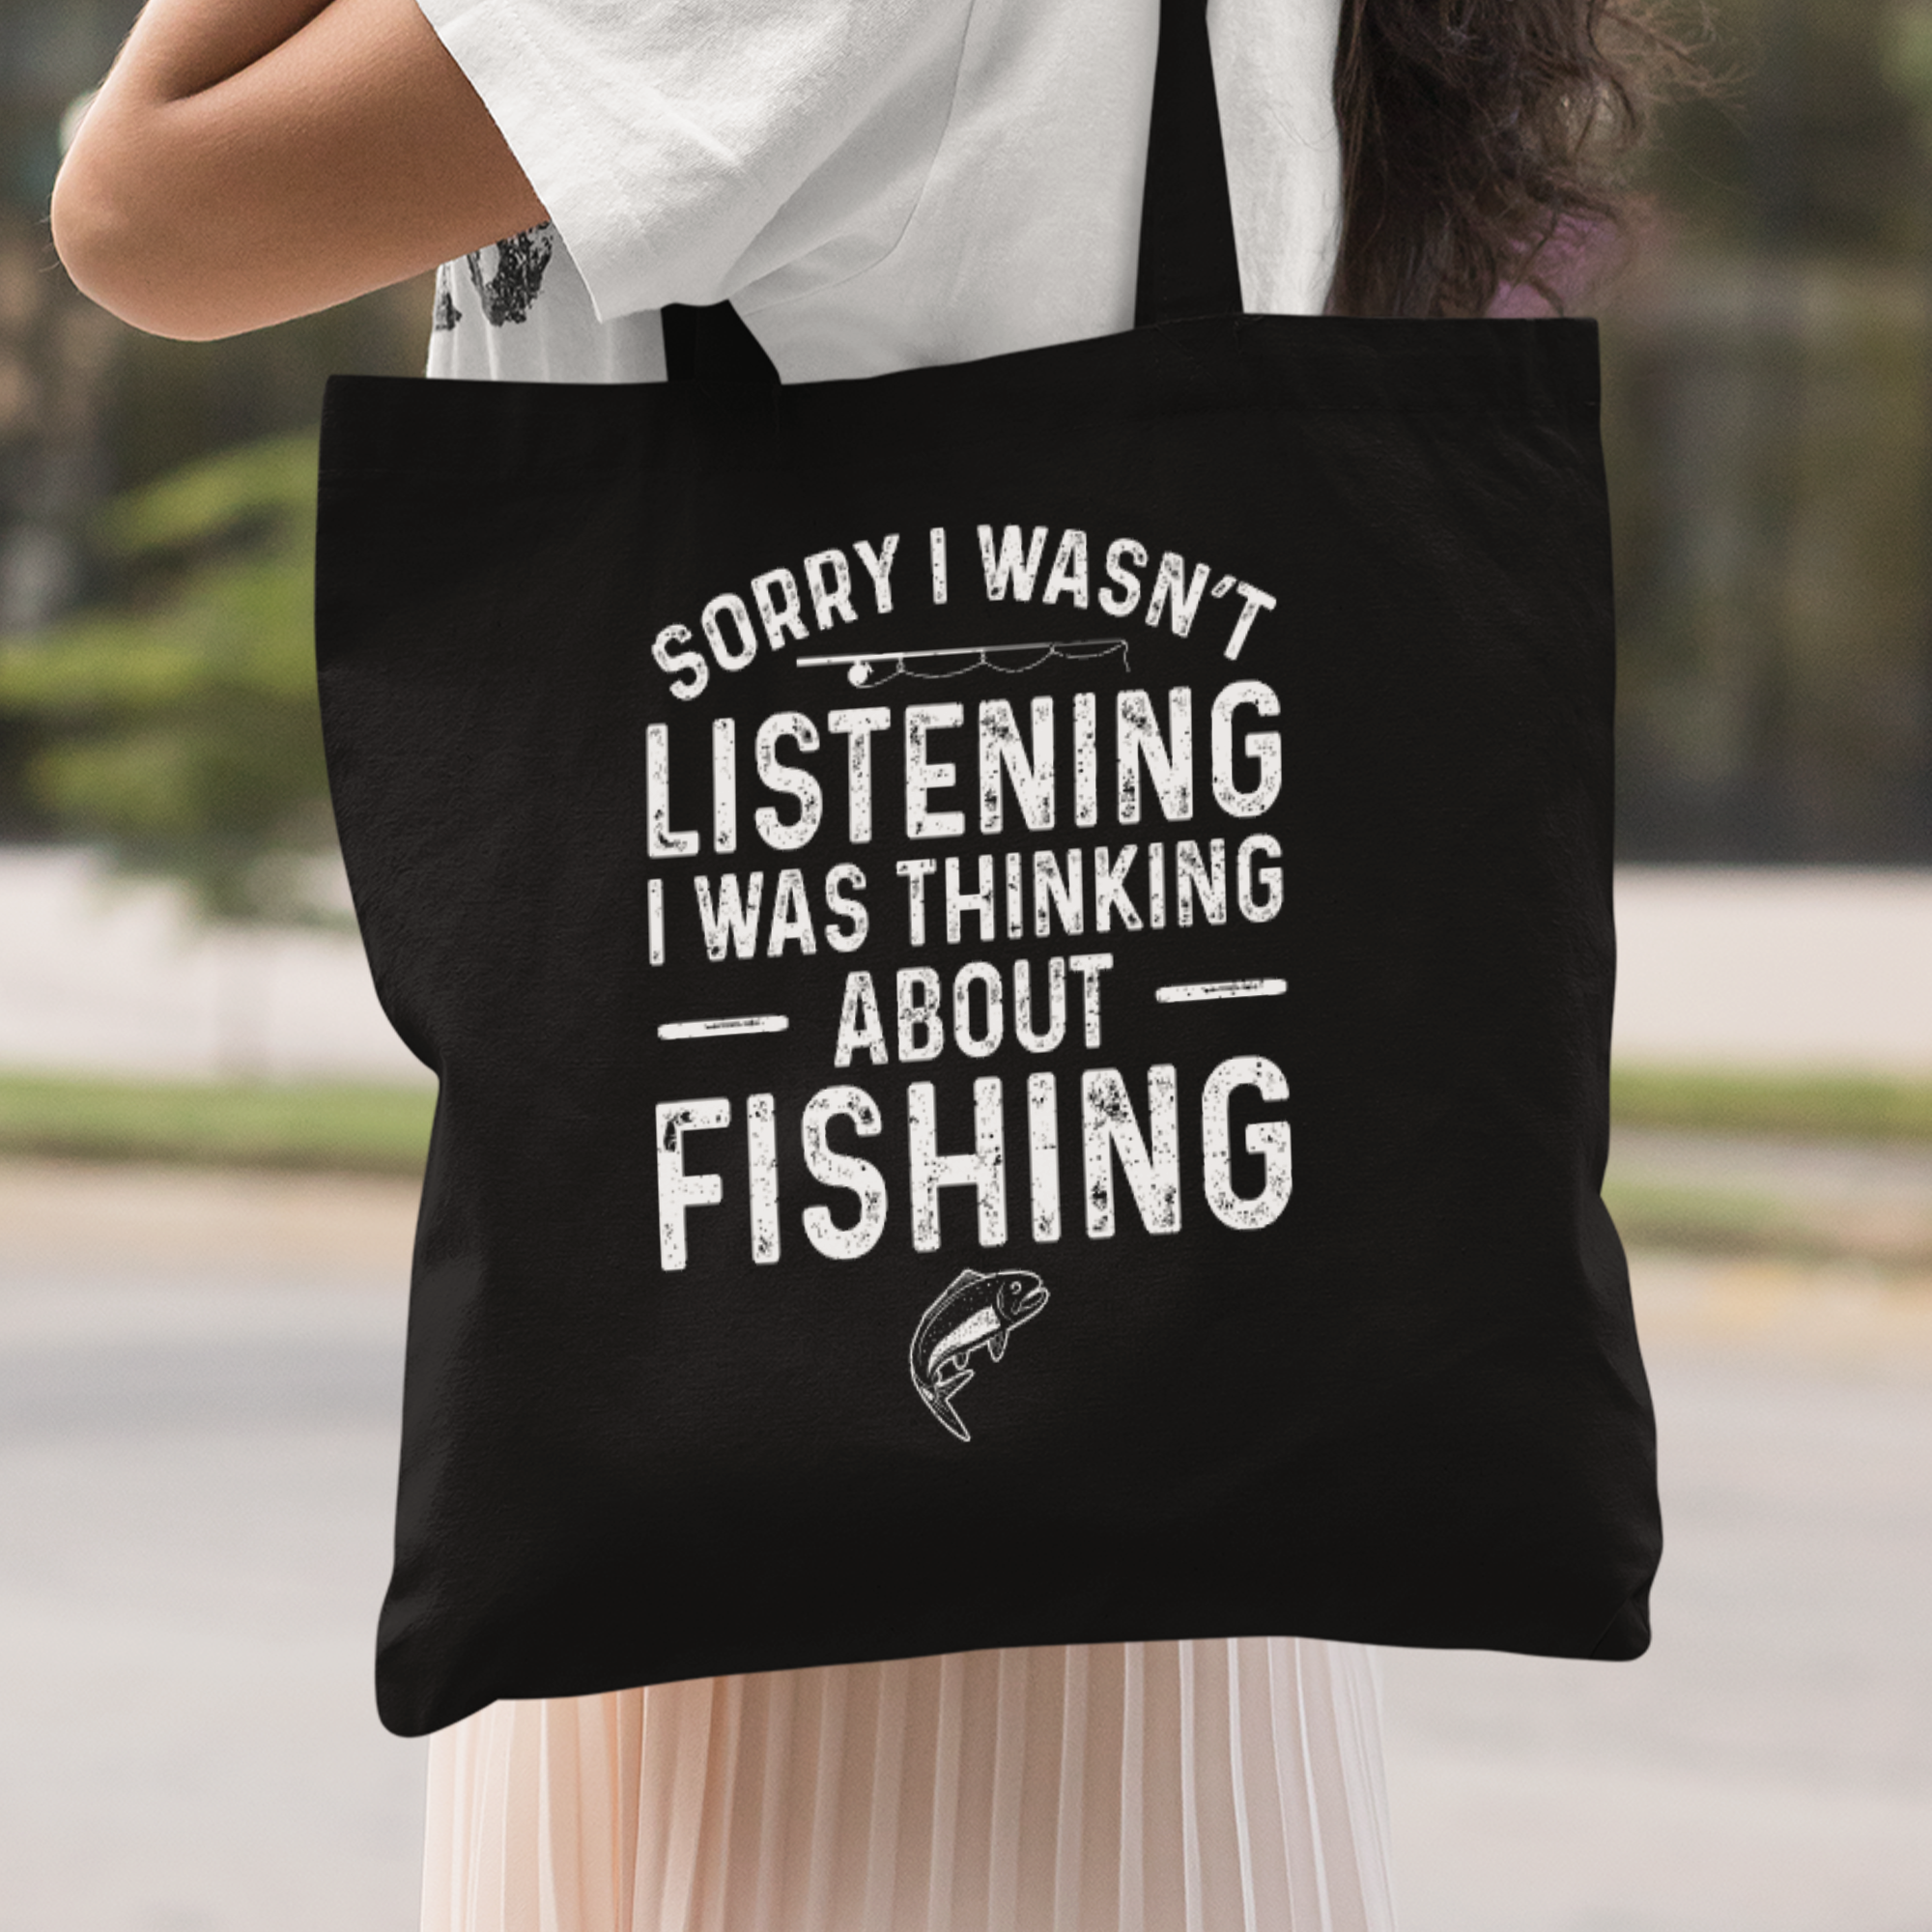 Sorry I Wasn't Listening I Was Thinking About Fishing Stoffbeutel - DESIGNSBYJNK5.COM